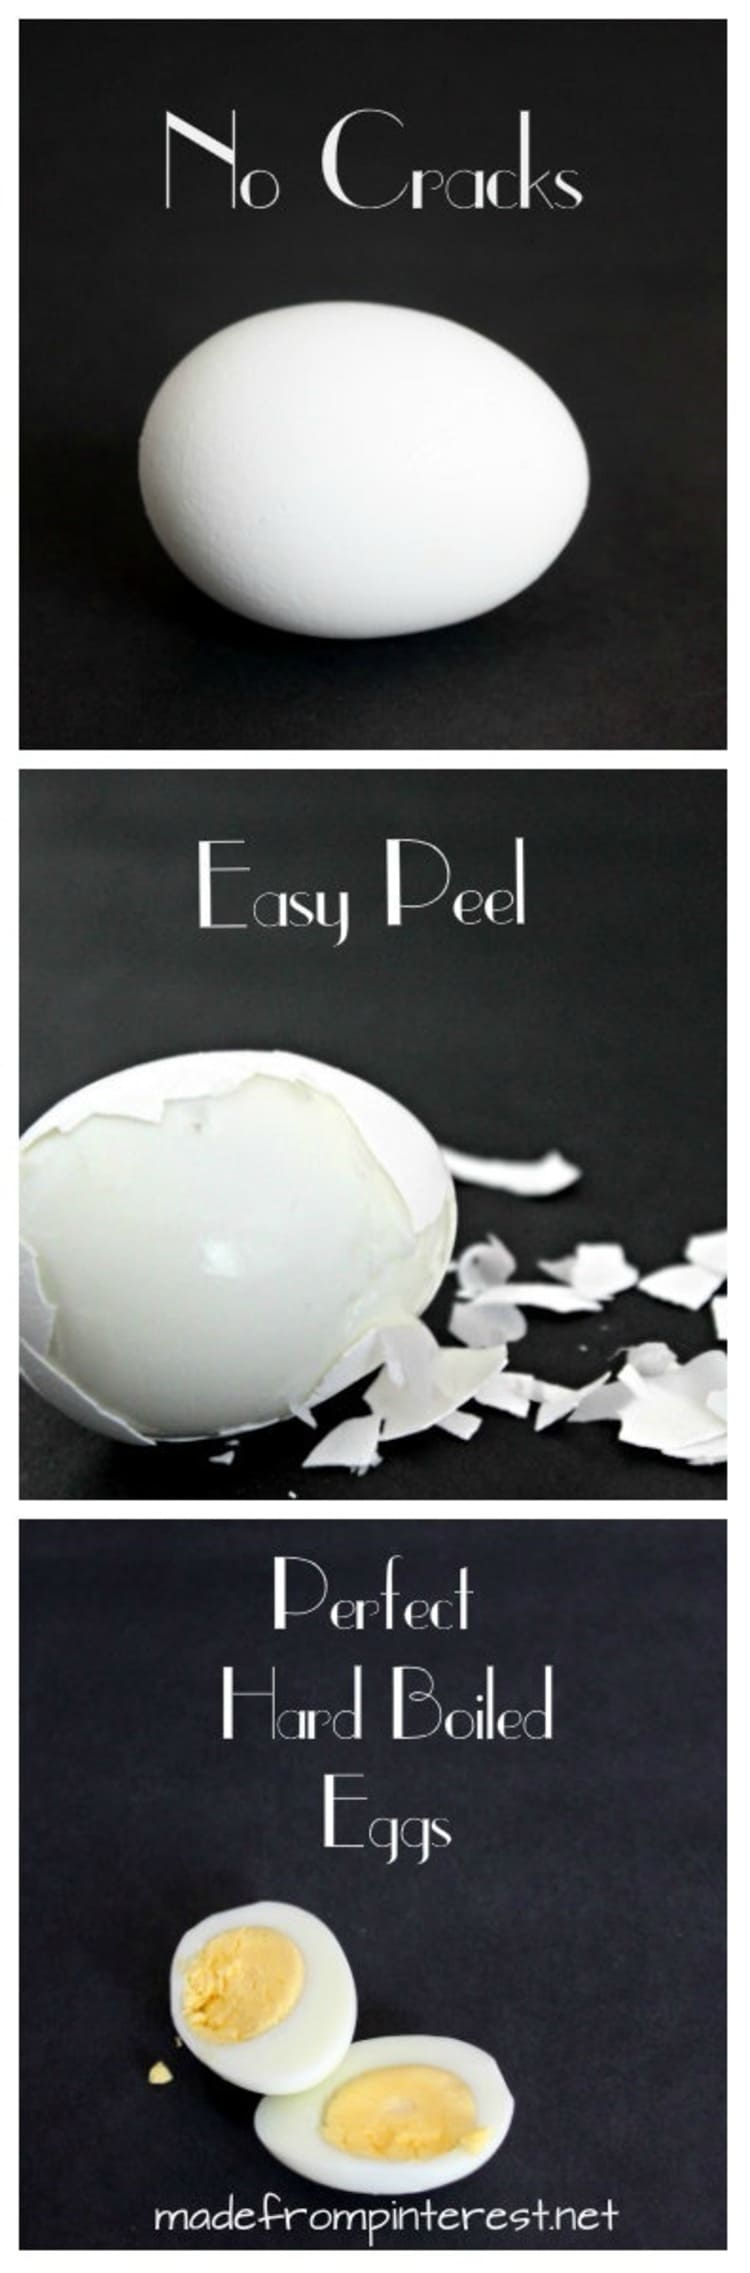 No Cracks, Easy Peel, Perfect Hard Boiled Eggs collage of three photos with egg on black background